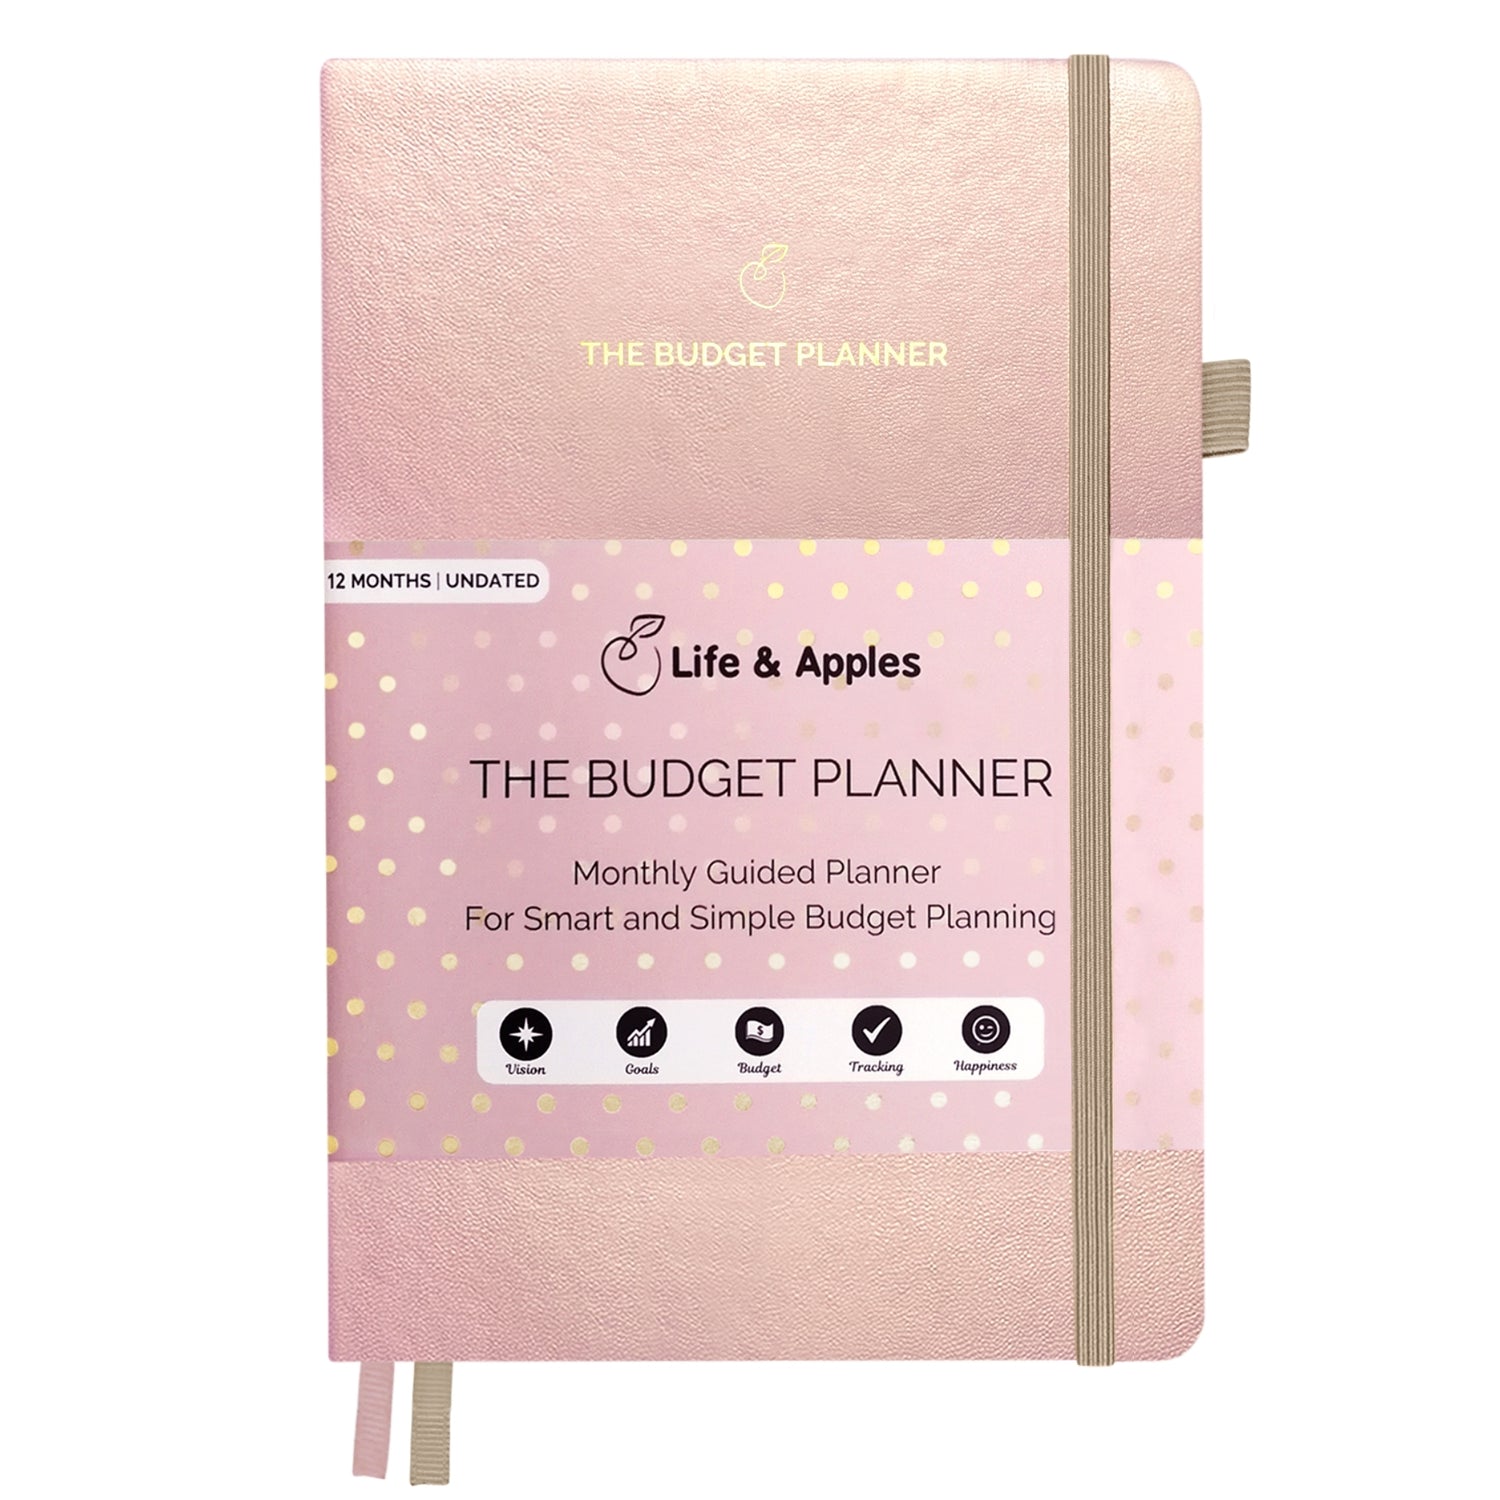 The Budget Planner – Life & Apples